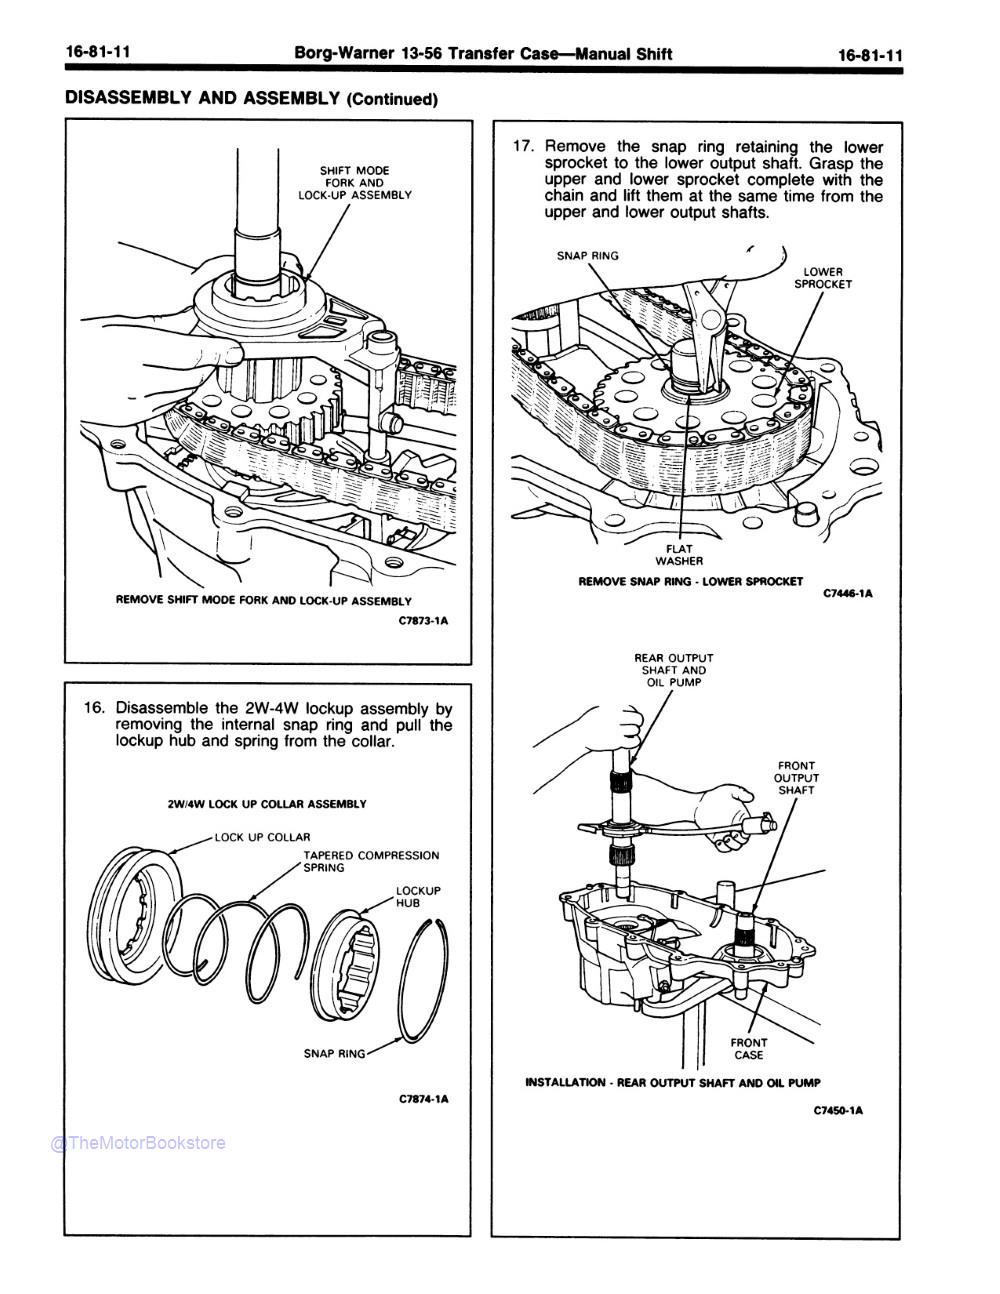 1988 Ford F-Series Truck, Bronco, & Econoline Shop Manuals - Sample Page 2